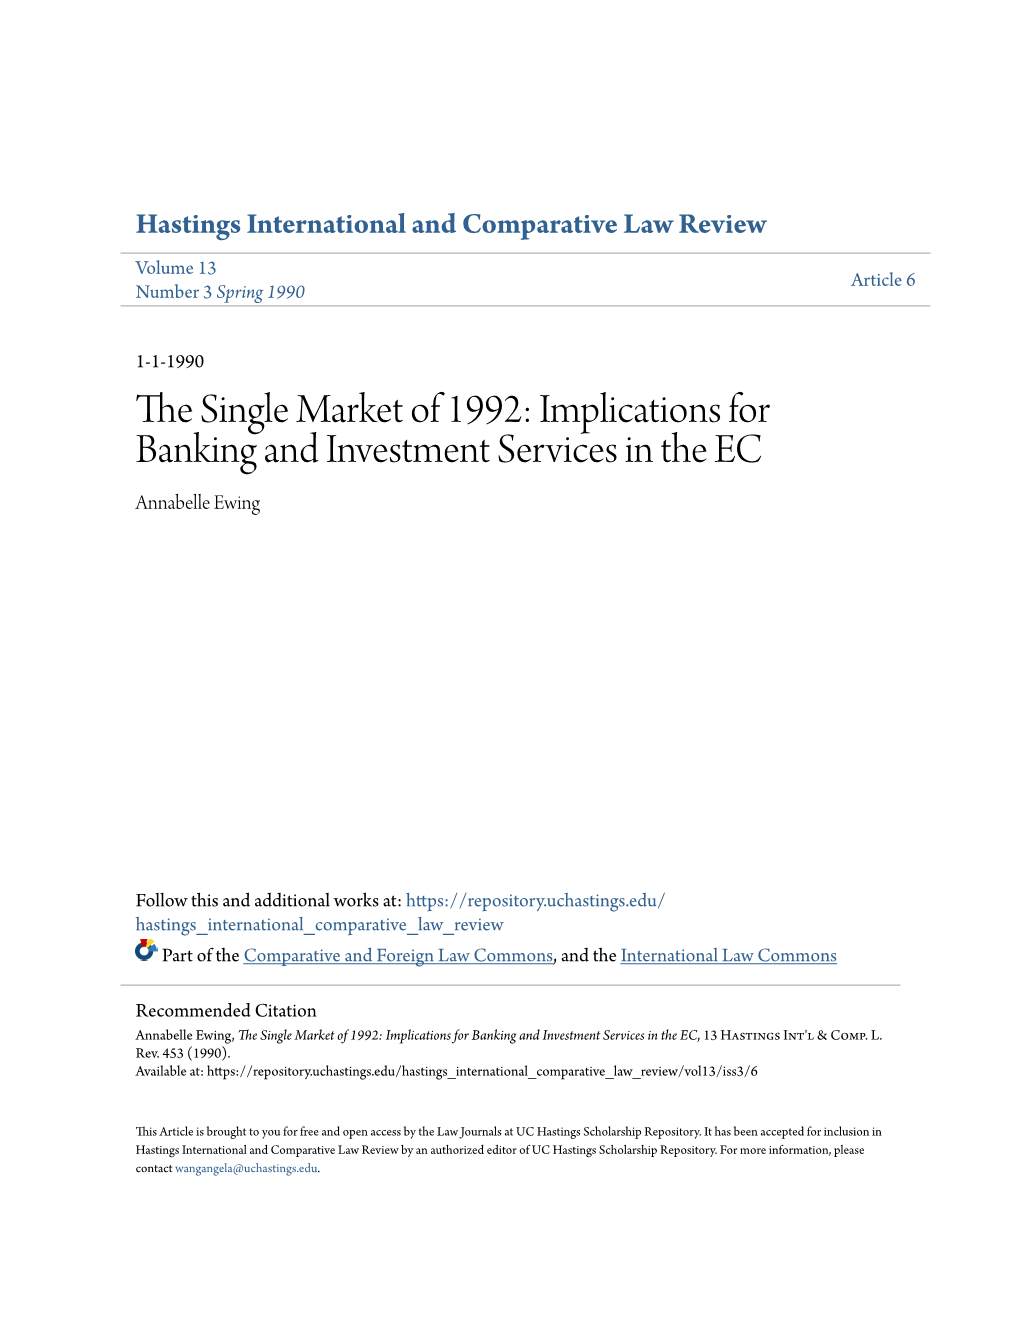 The Single Market of 1992: Implications for Banking and Investment Services in the EC, 13 Hastings Int'l & Comp